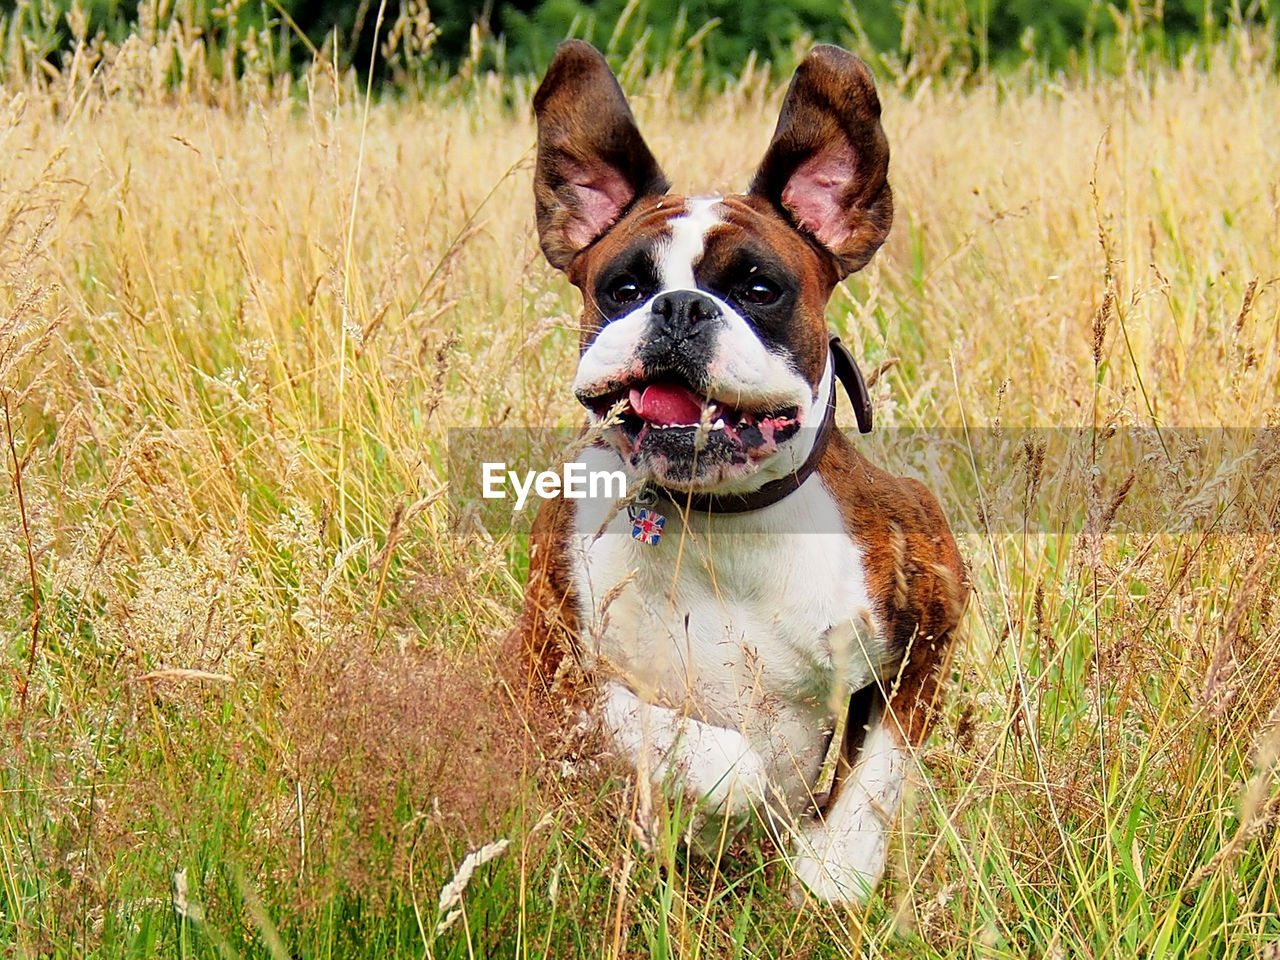 Close-up of dog standing at grassy field